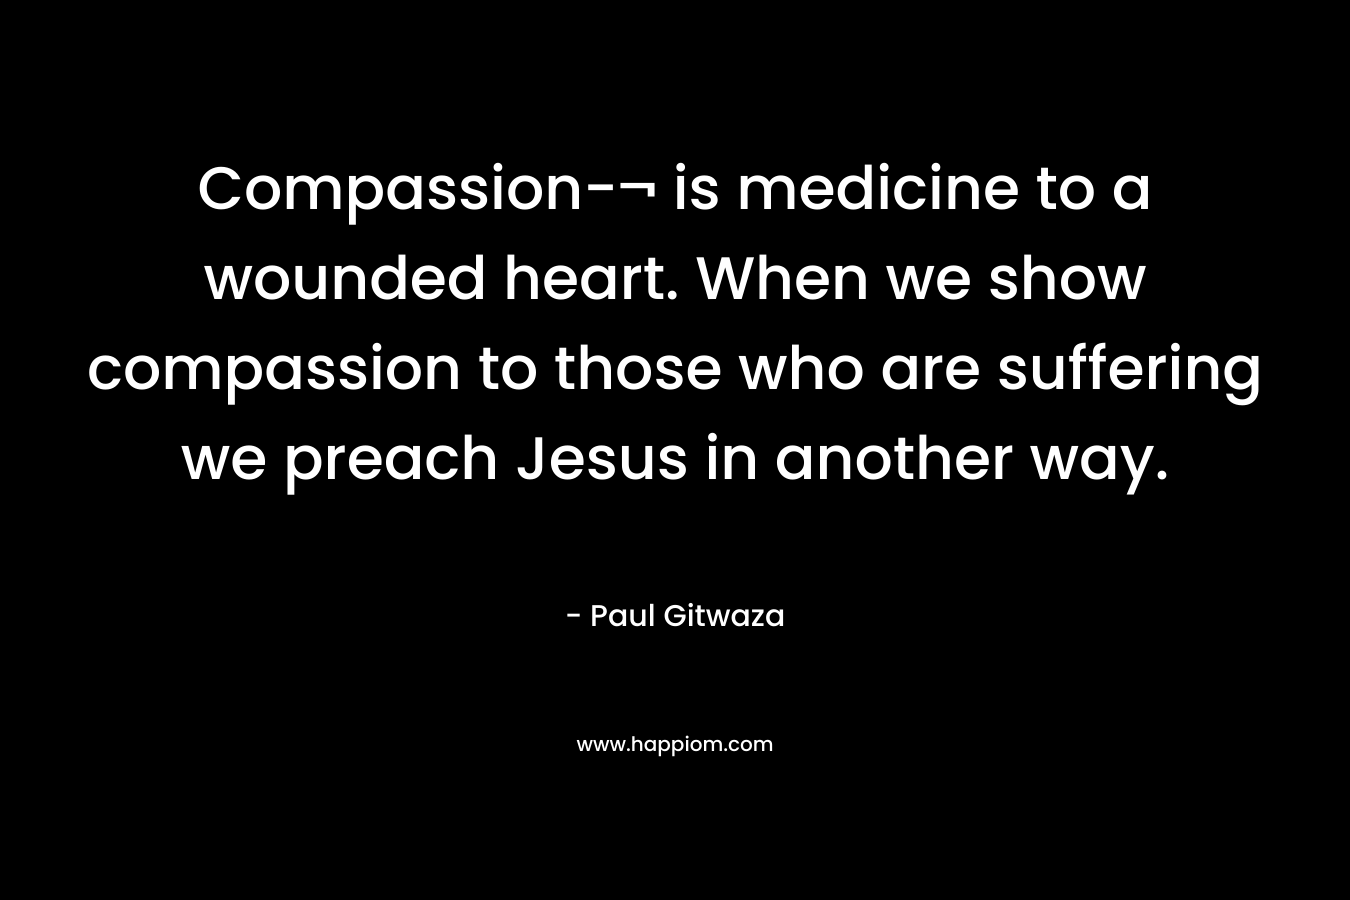 Compassion-¬ is medicine to a wounded heart. When we show compassion to those who are suffering we preach Jesus in another way.